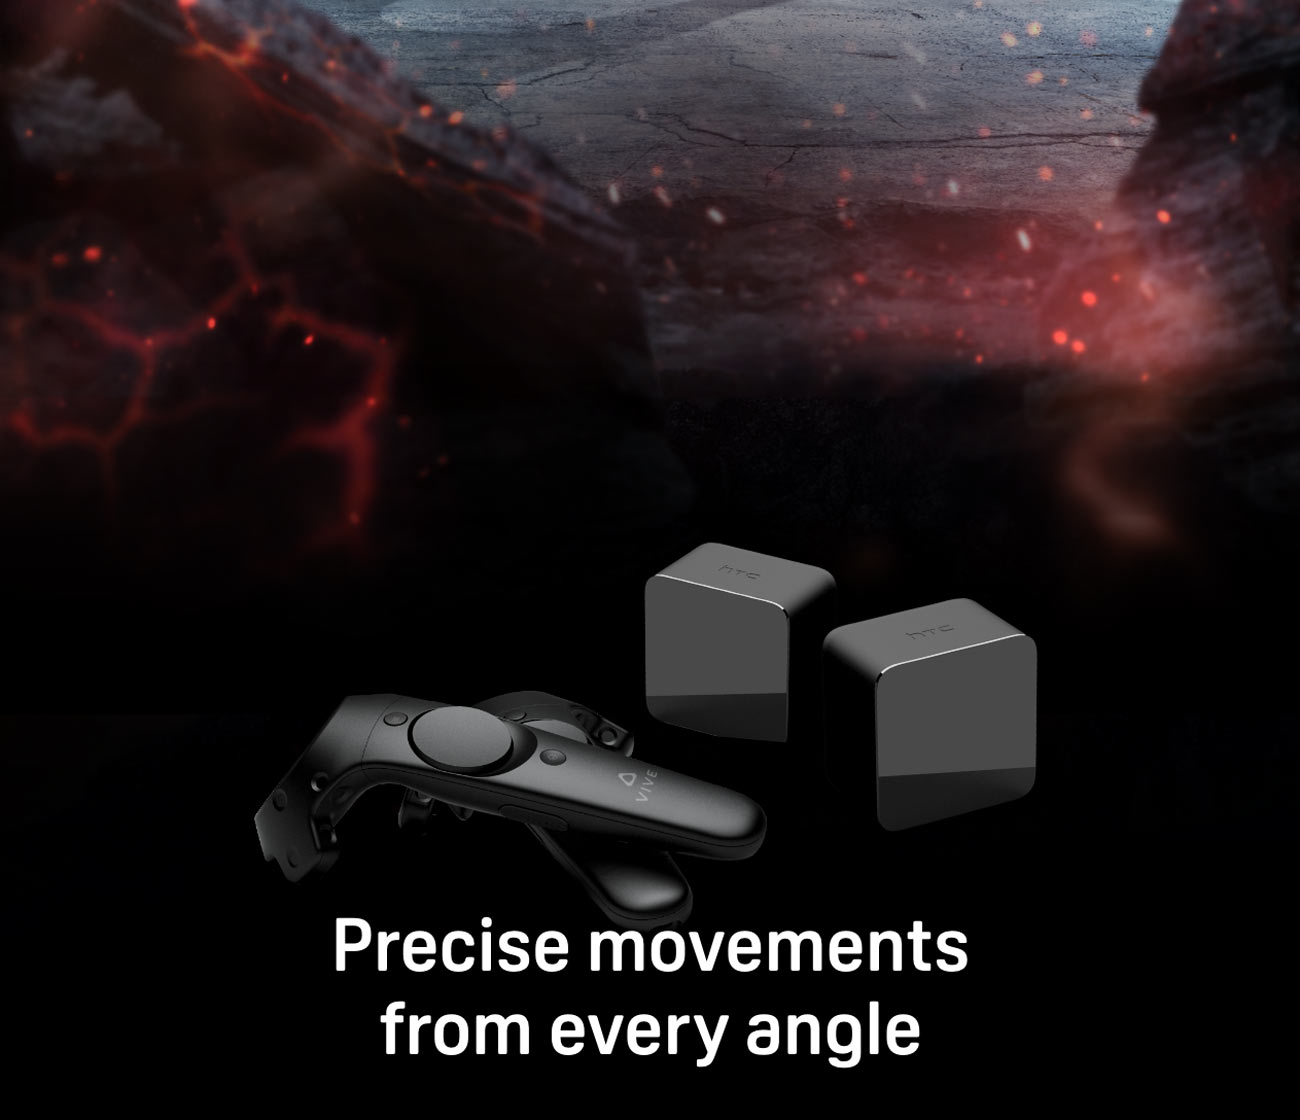 Precise movements from every angle